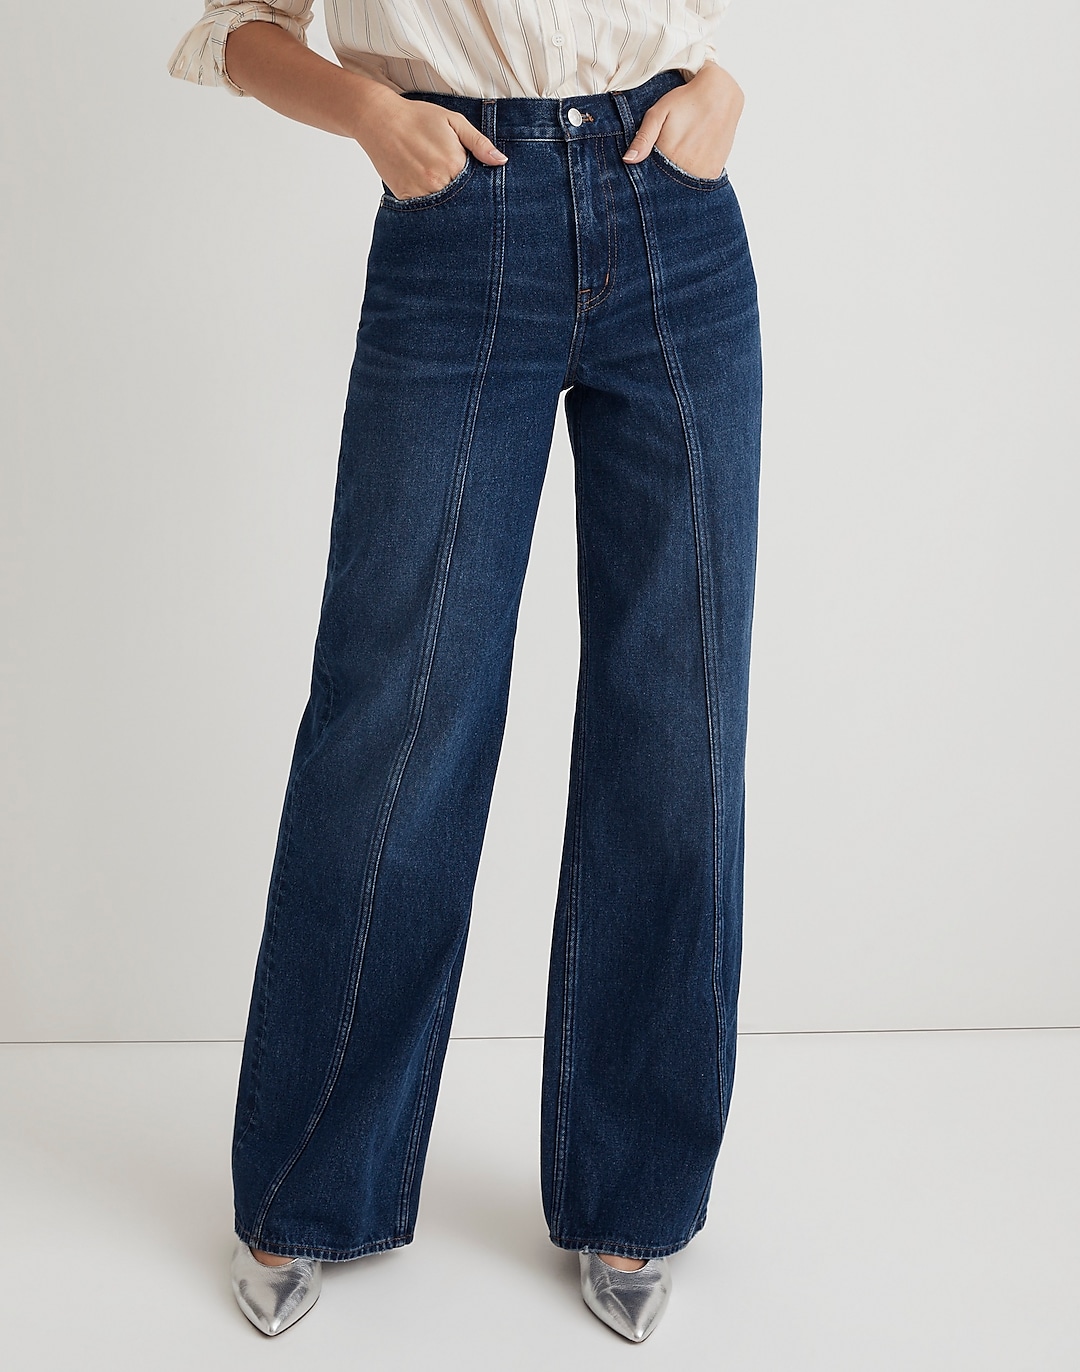 Superwide-Leg Jeans in Carrington Wash: Twisted-Seam Edition | Madewell